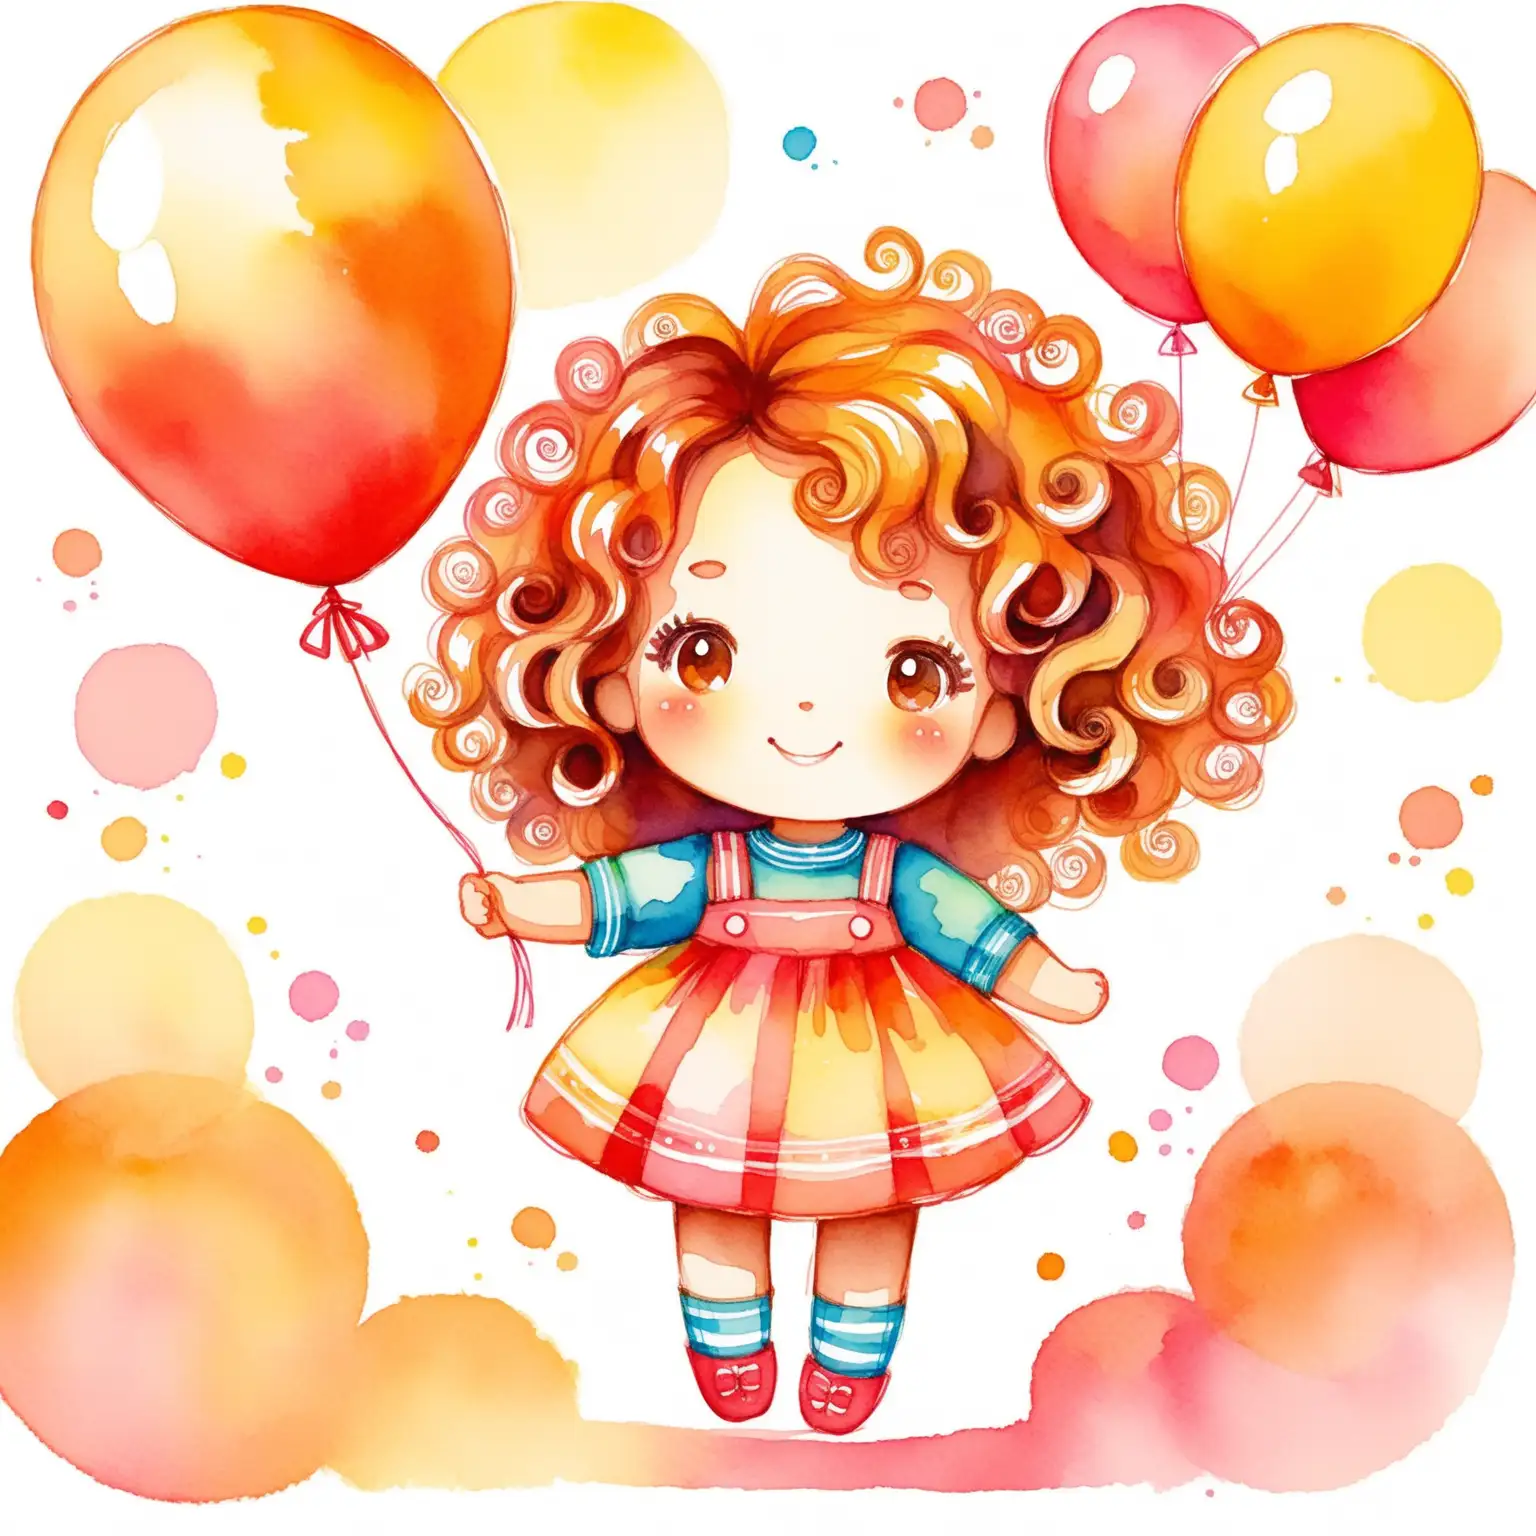 Adorable CurlyHaired Doll with Balloon Cheerful Sketchy Expressionist Illustration